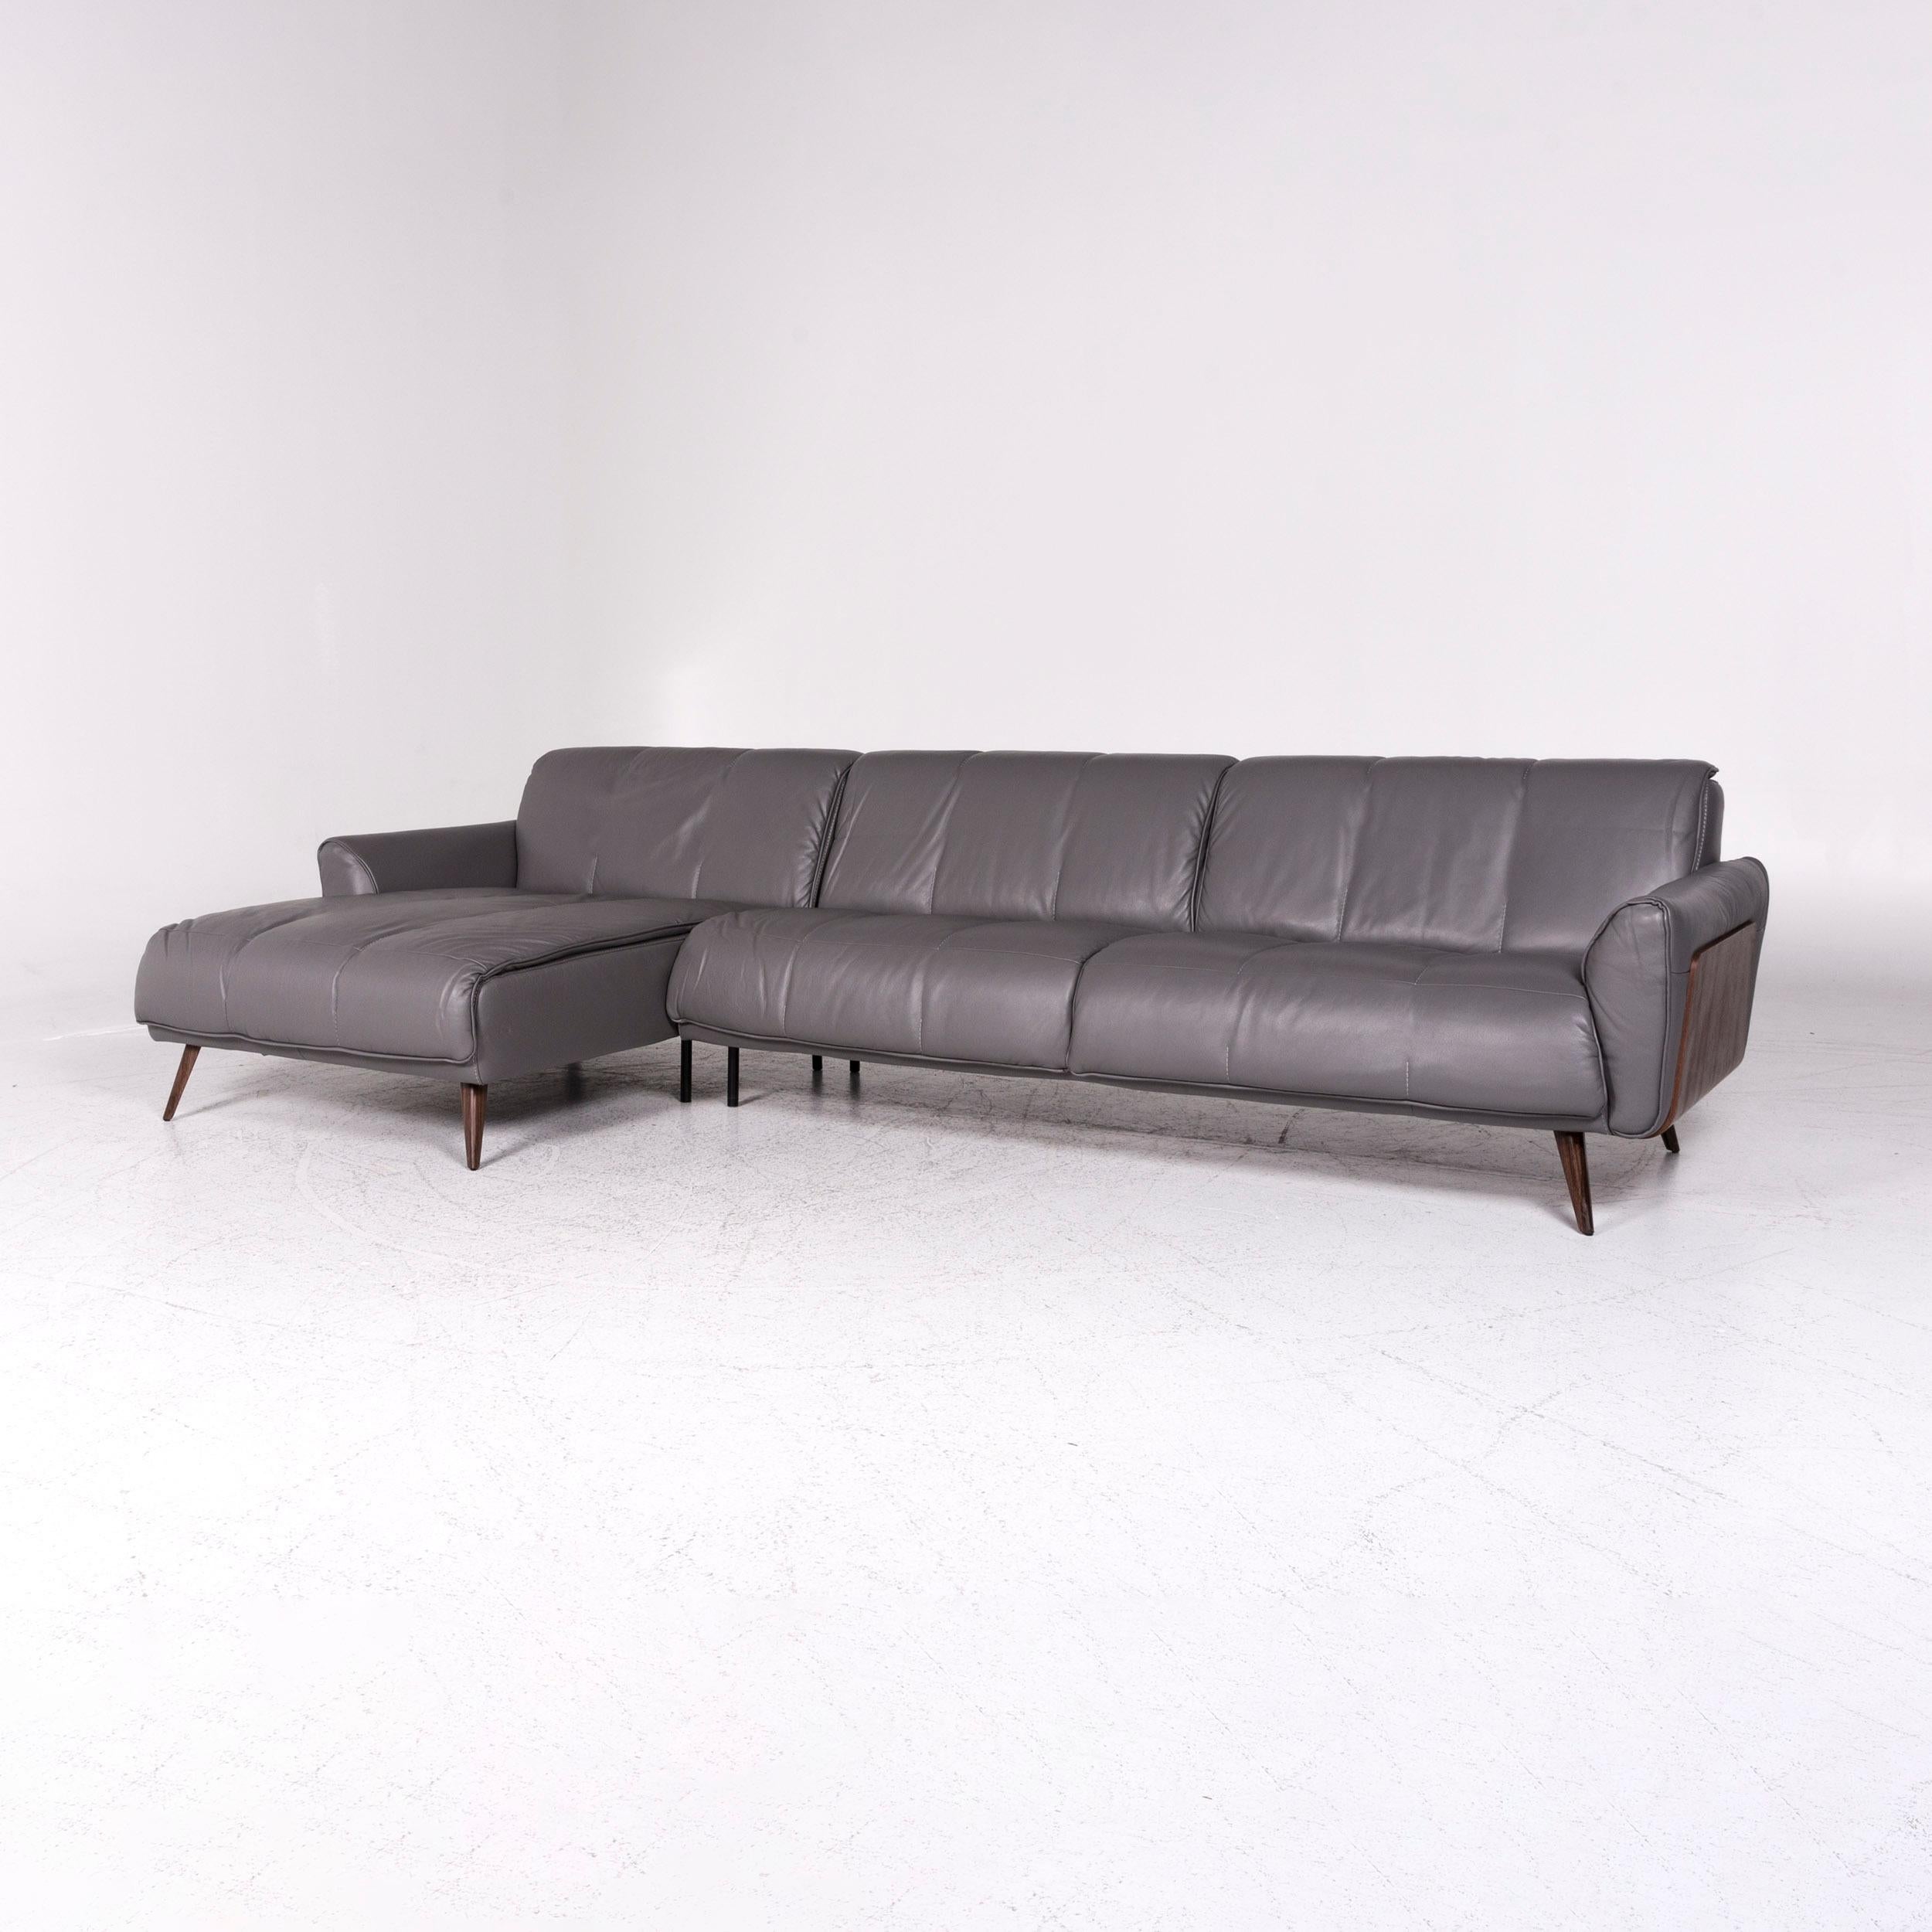 We bring to you a Natuzzi Editions Talento designer leather corner sofa gray sofa couch.

 
 Product measurements in centimeters:
 
Depth: 95
Width: 155
Height: 79
Seat-height: 48
Rest-height: 59
Seat-depth: 58
Seat-width: